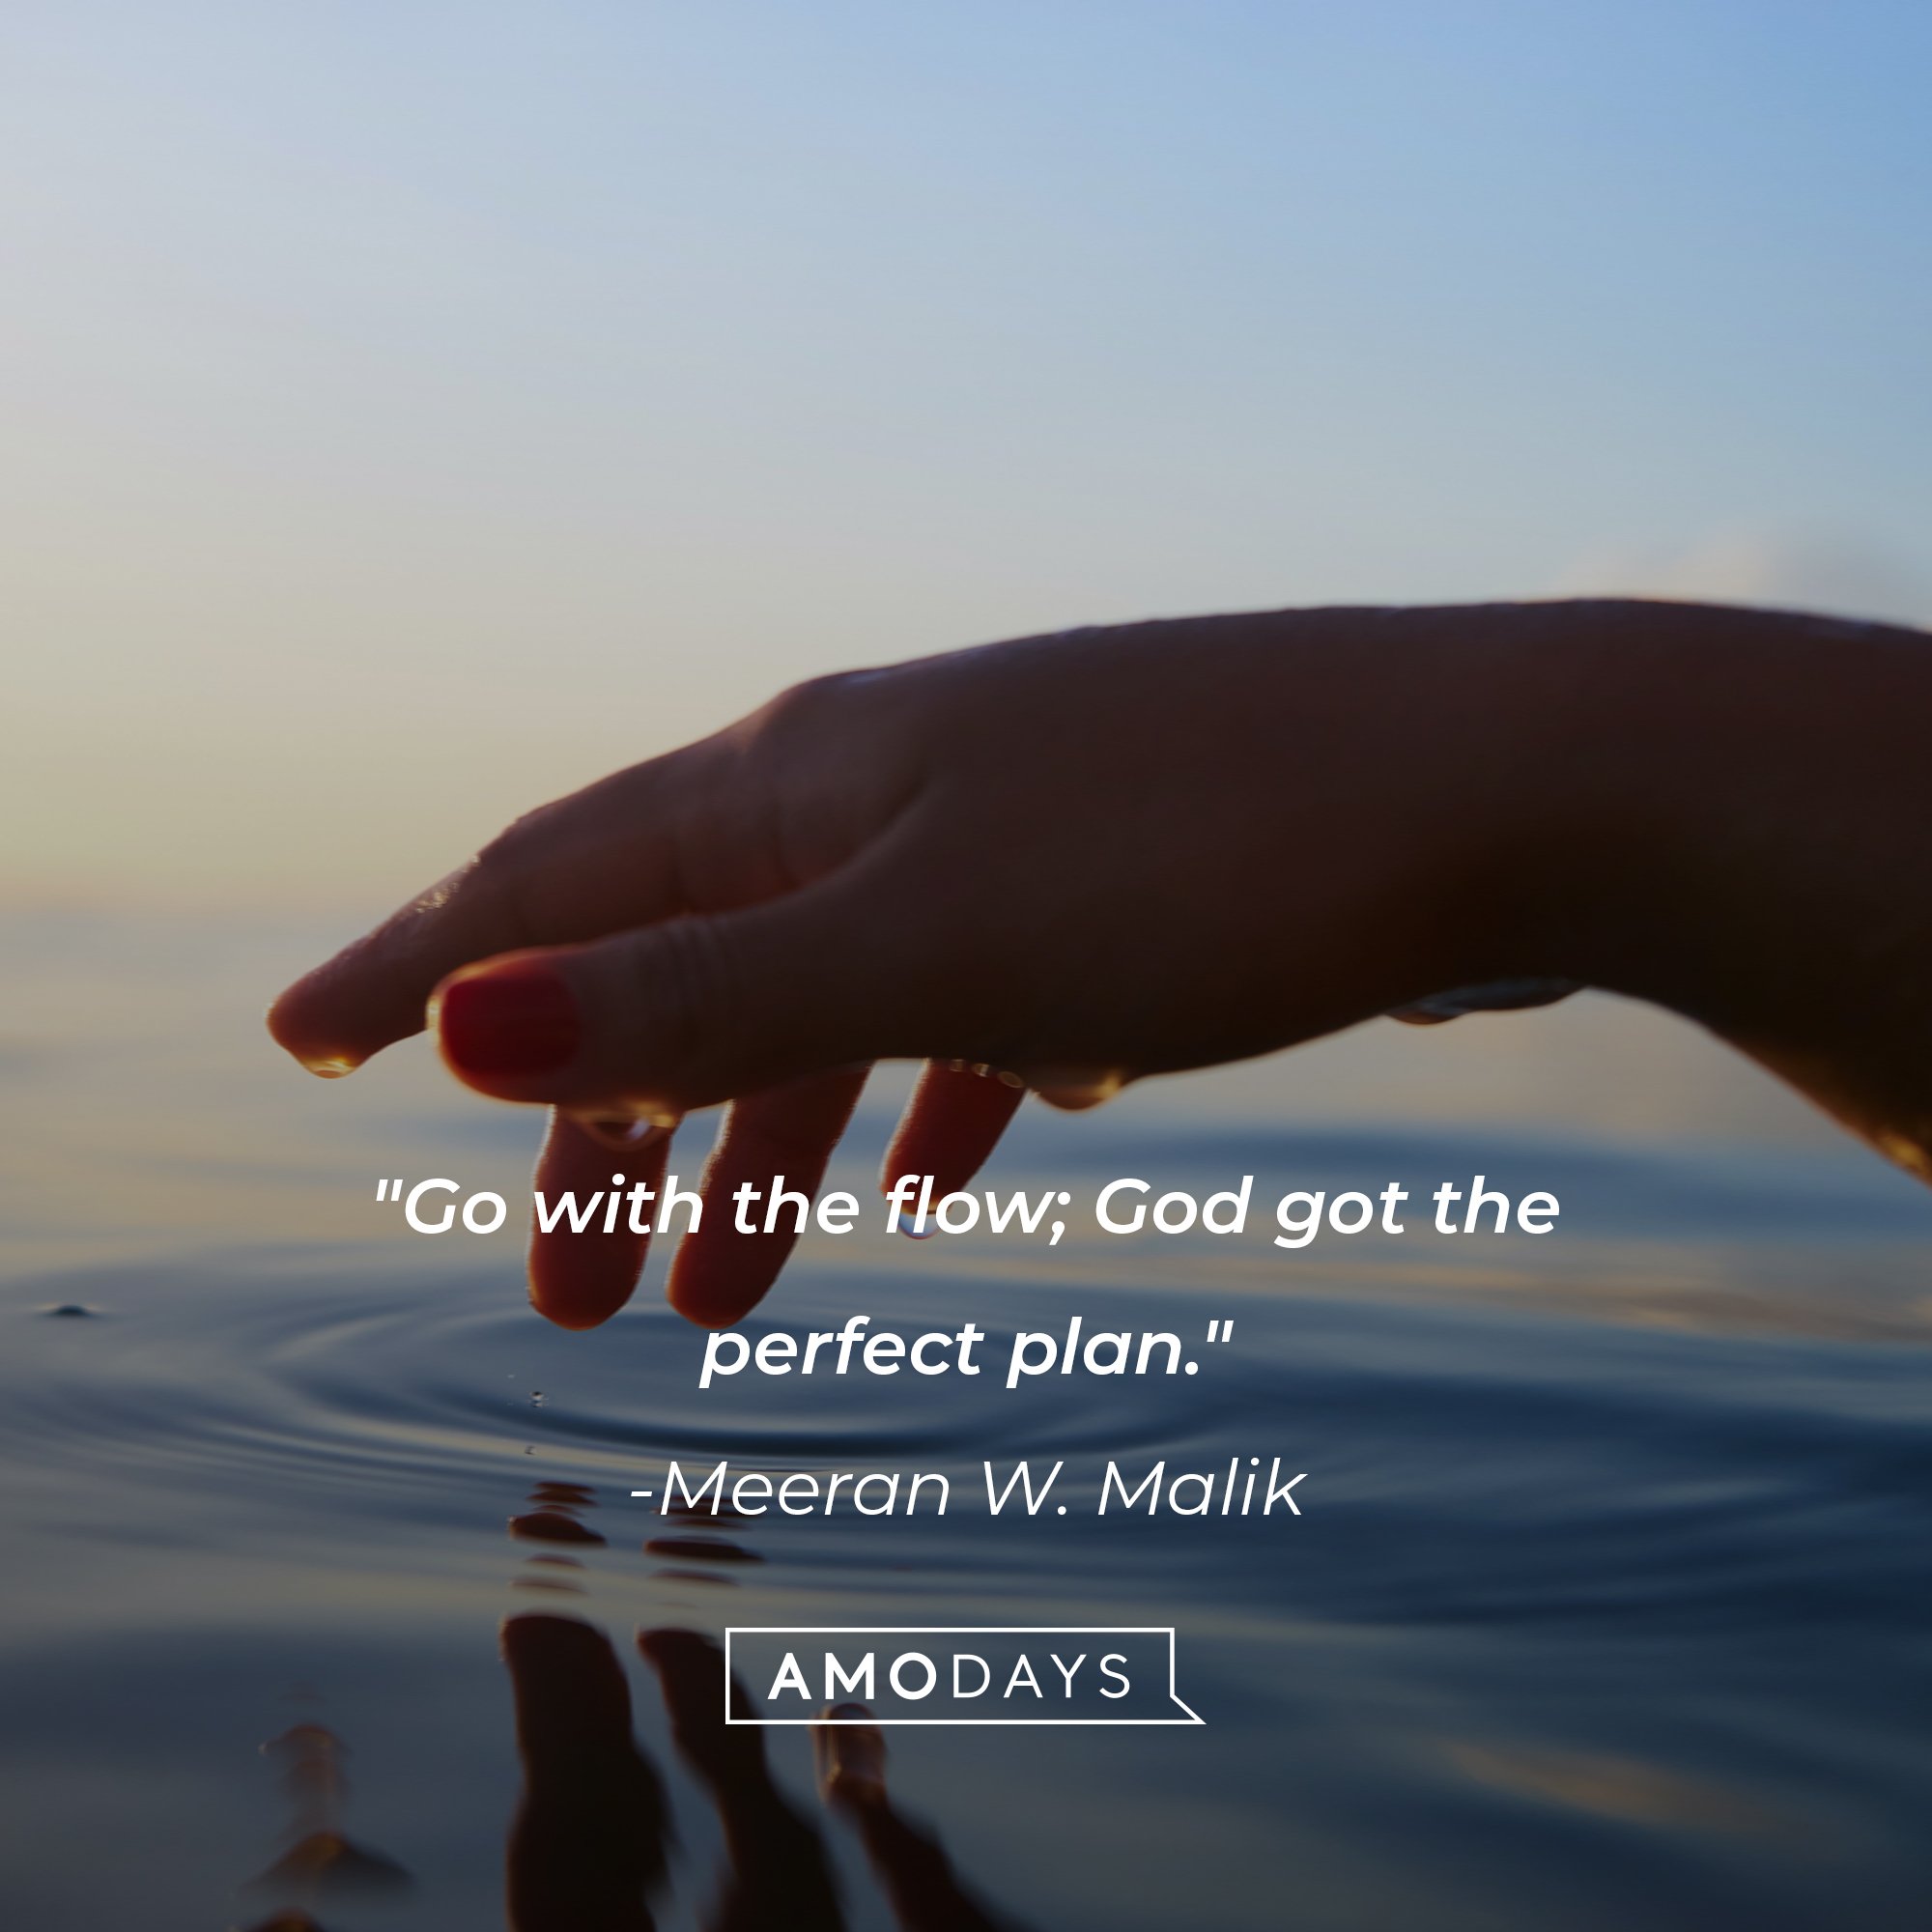 Meeran W. Malik’s quote: "Go with the flow; God got the perfect plan." | Image: AmoDays